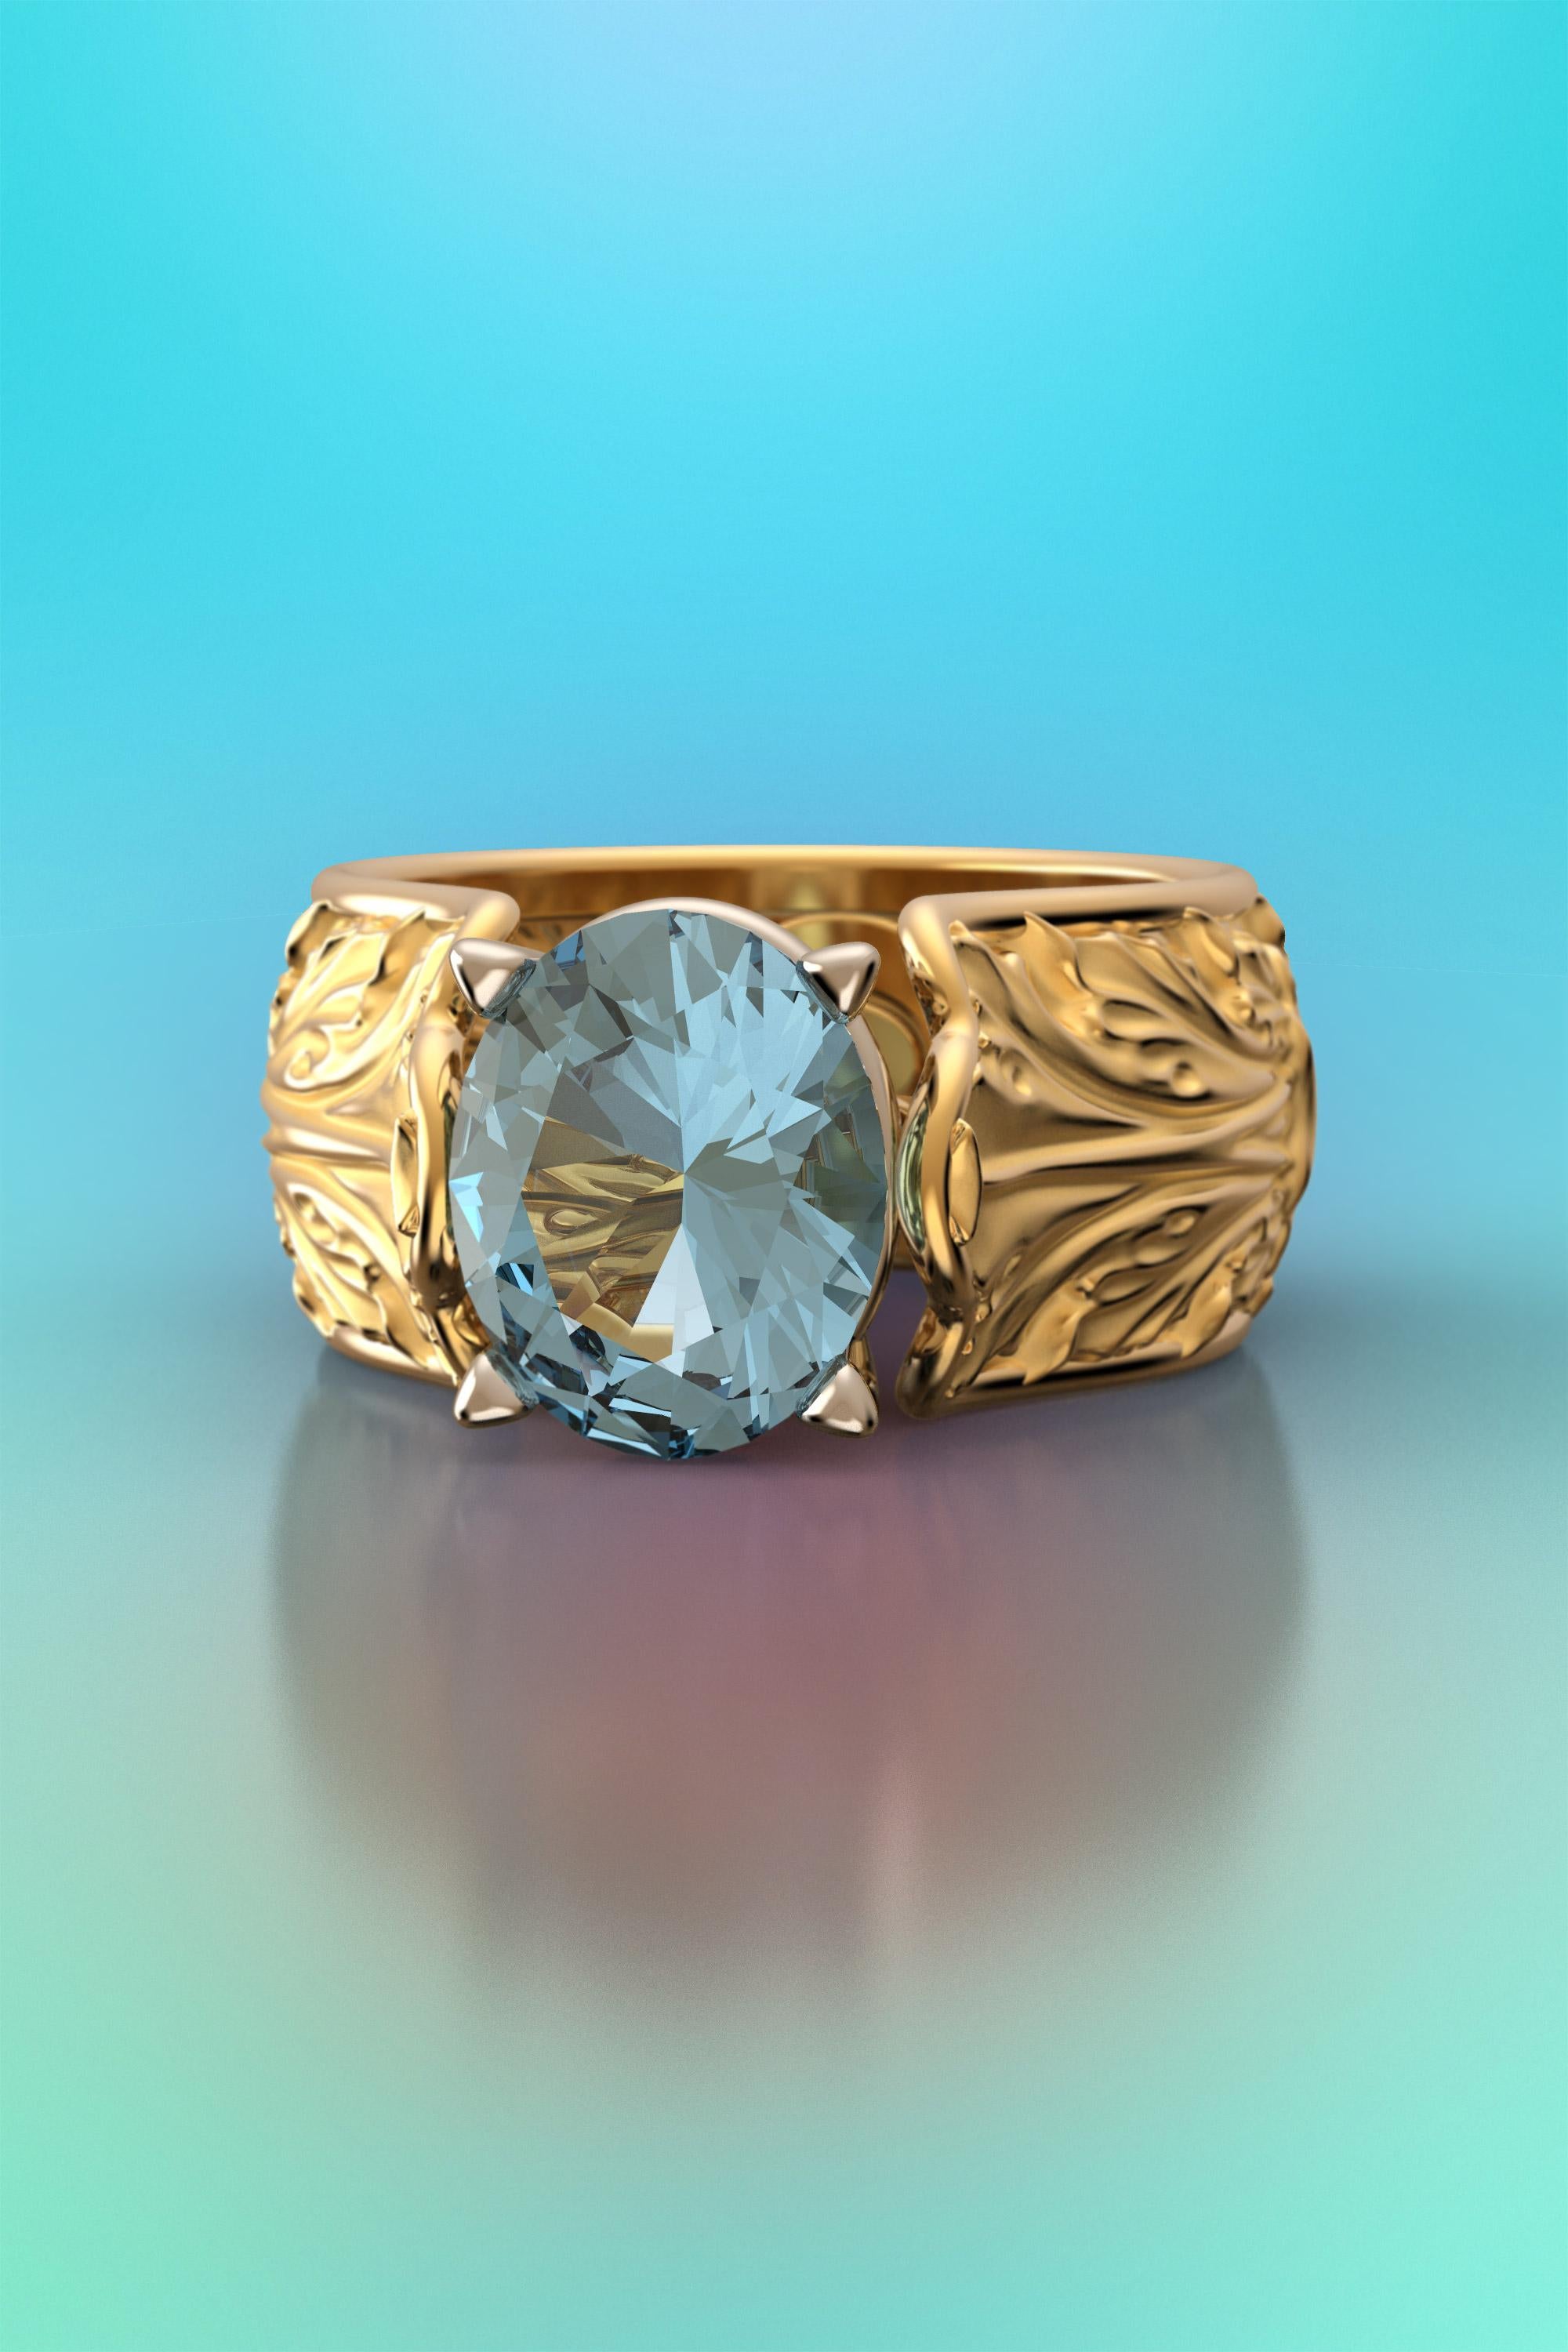 For Sale:  Baroque 18k Gold Ring with Natural Aquamarine Italian Fine Jewelry Made in Italy 5